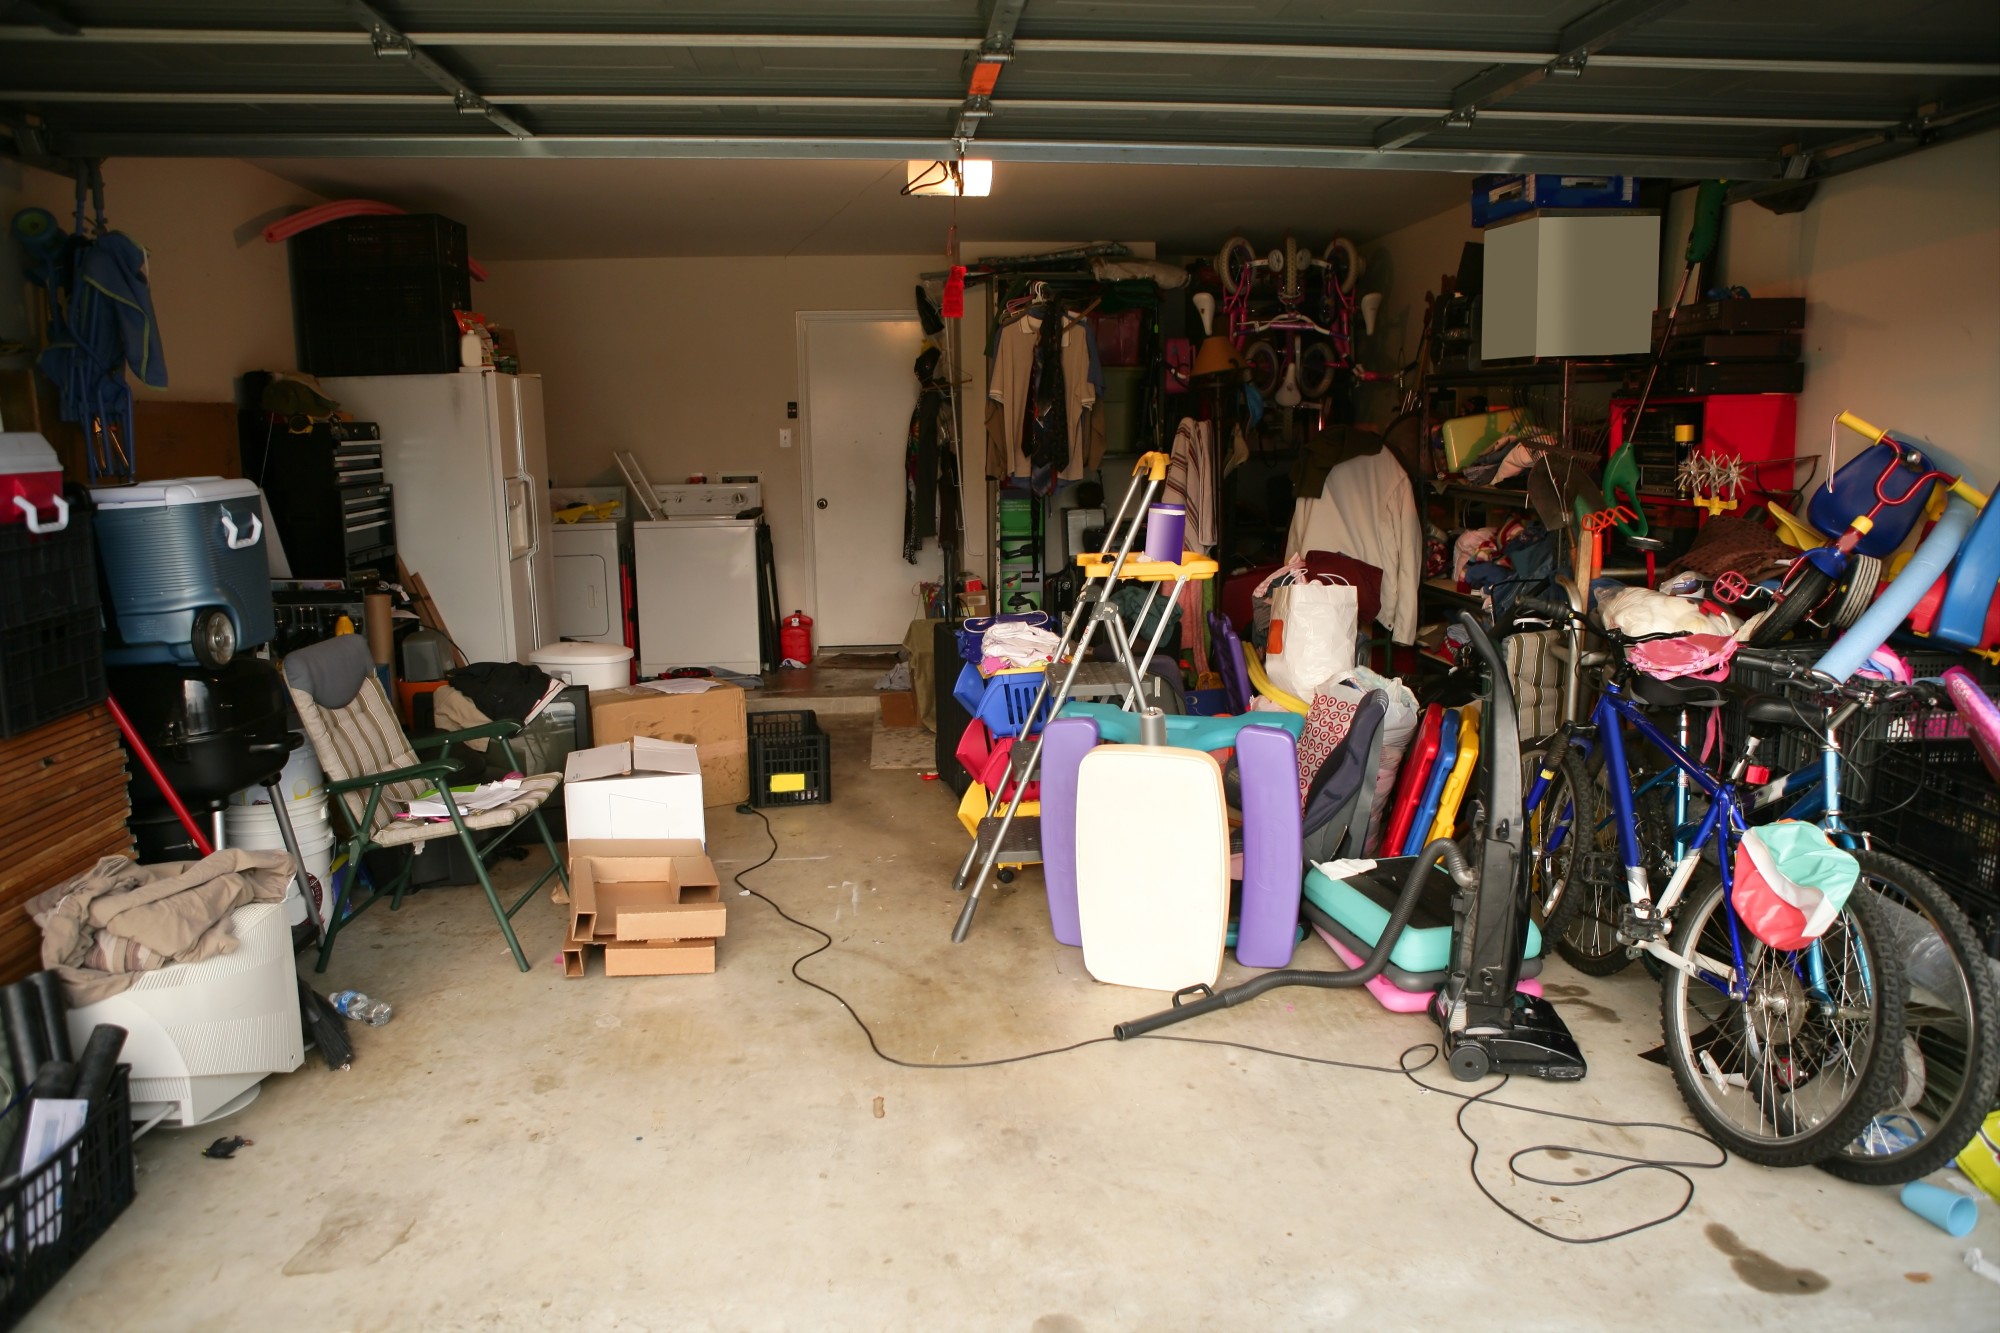 Messy Garage in Need of a Makeover